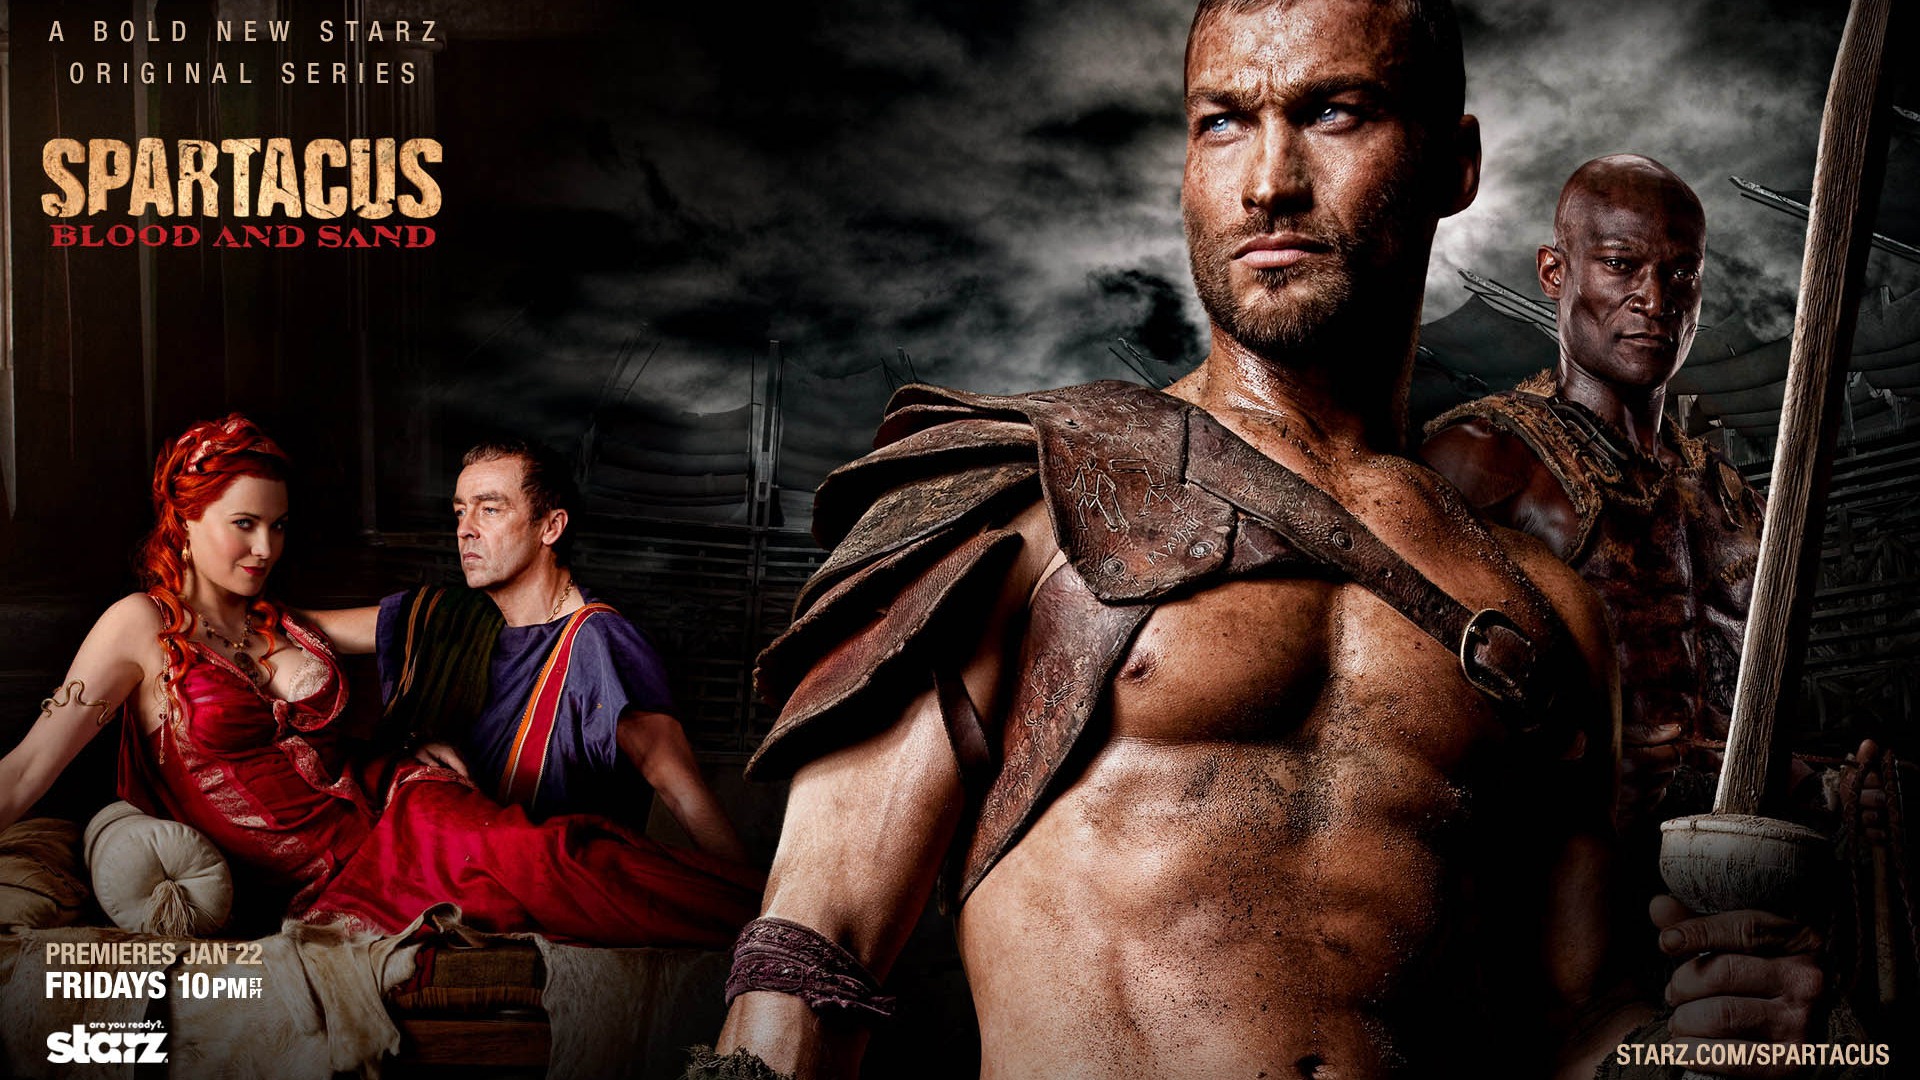 Spartacus: Blood and Sand HD wallpapers #7 - 1920x1080